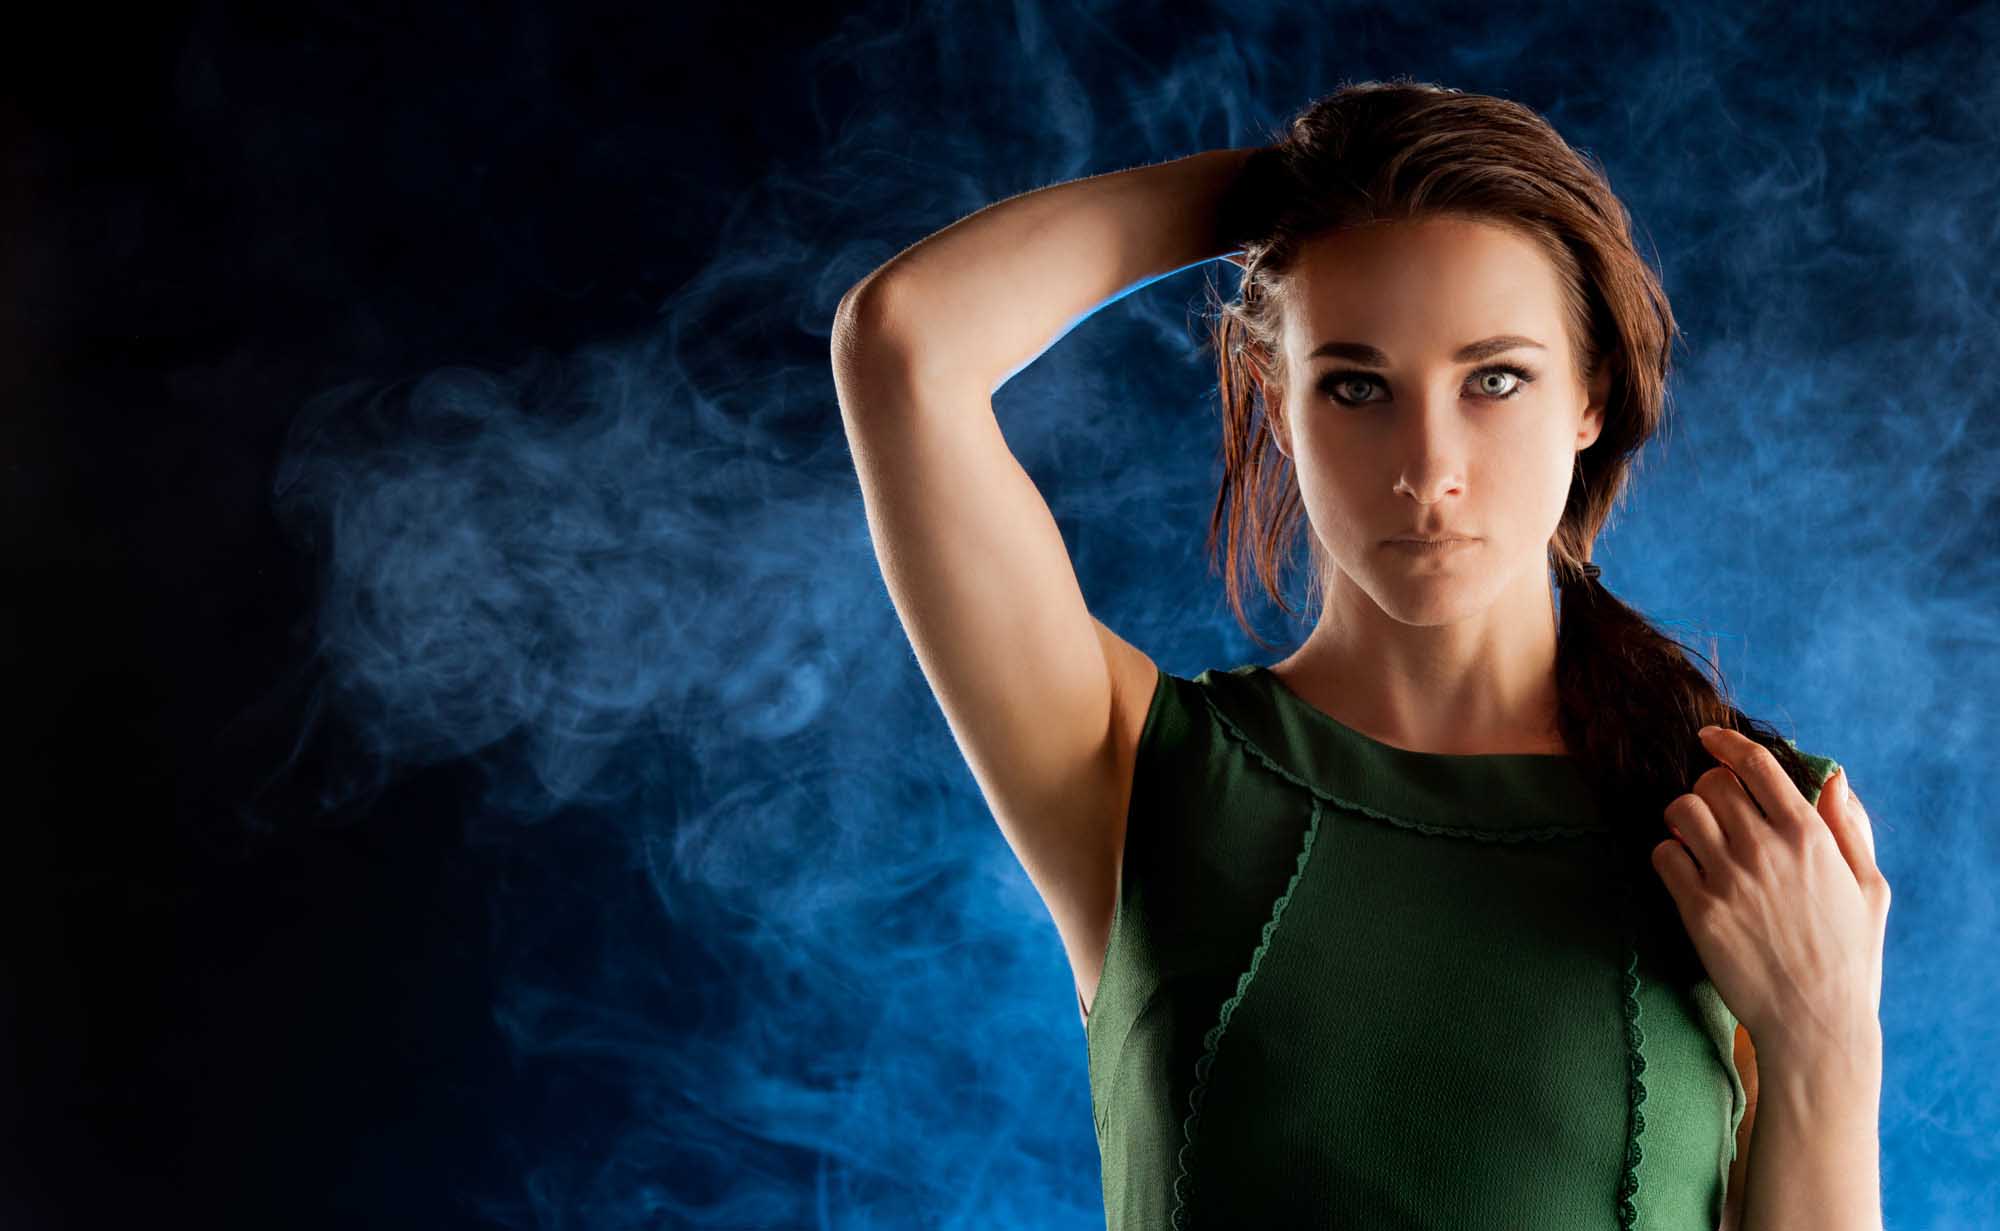 Portrait of model with dramatic lighting and smoke in background | Fashion Photography 